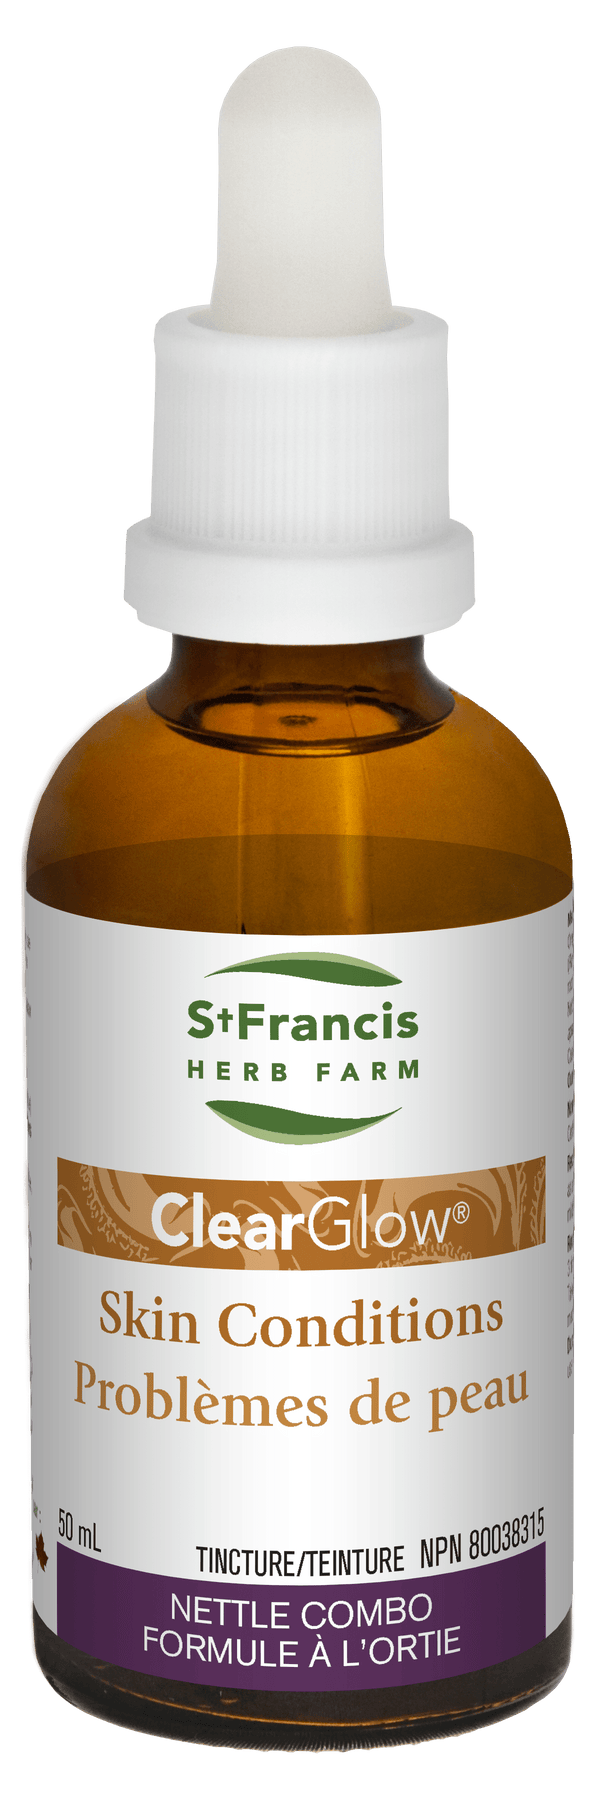 St Francis Herb Farm ClearGlow 50 ml